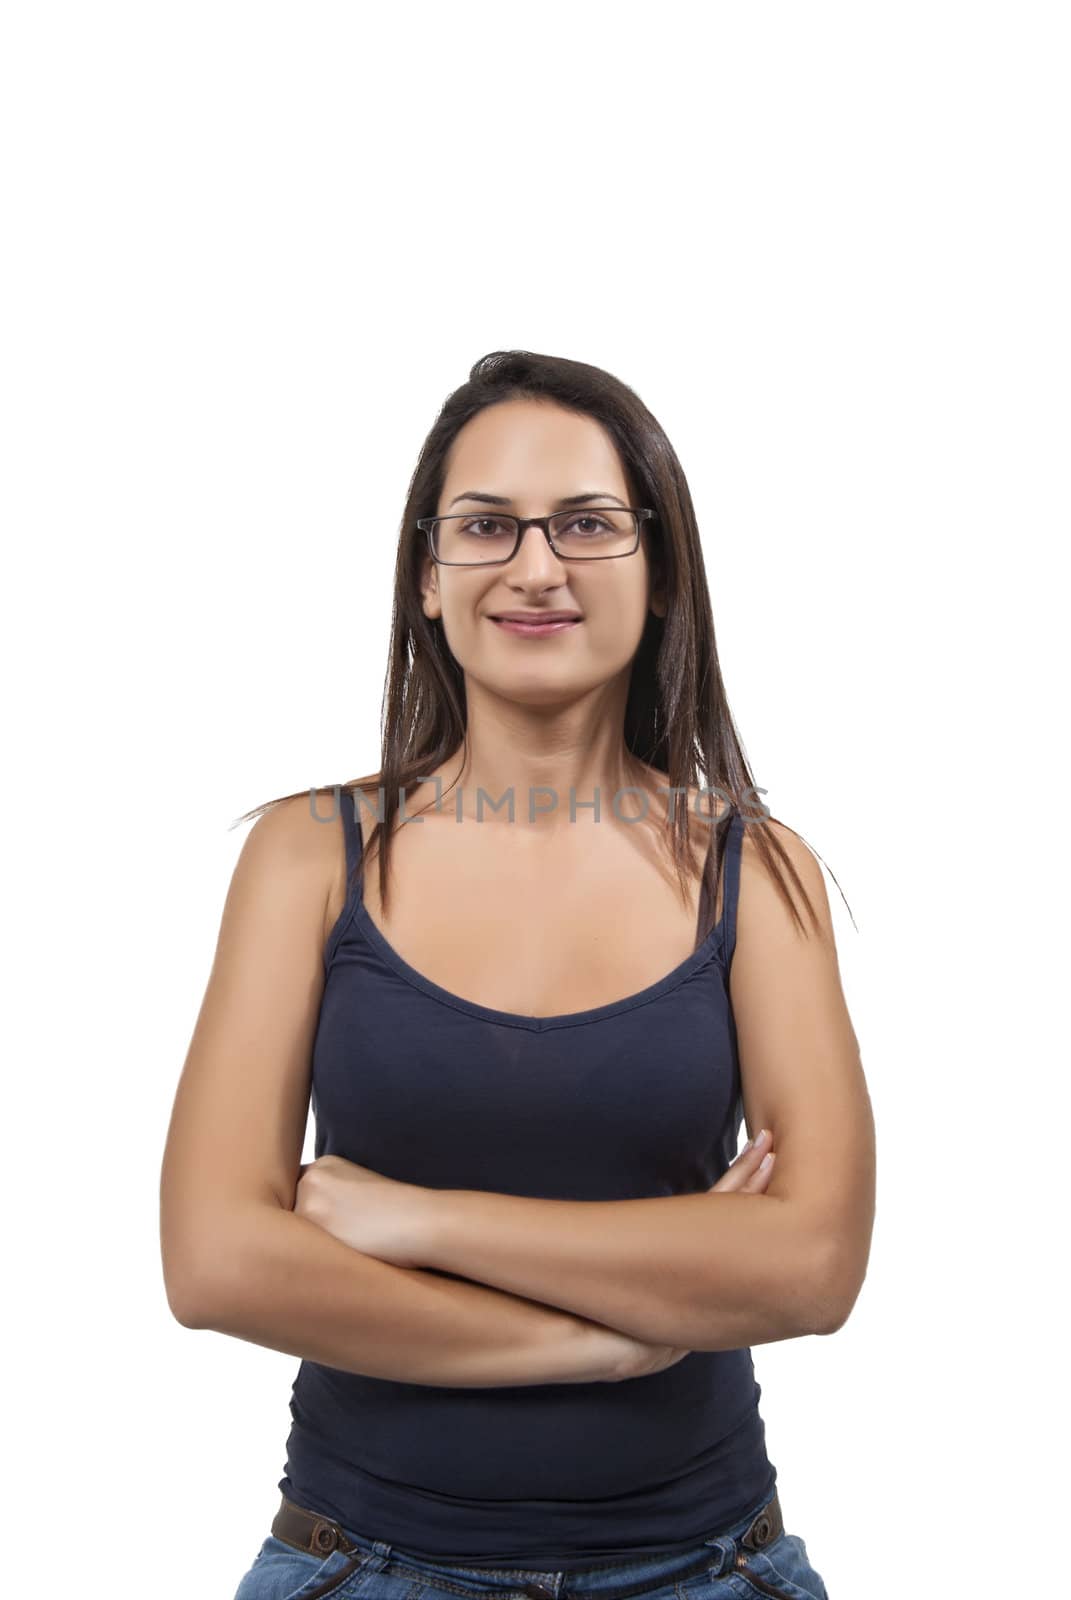 Lady with glasses smiling by pencap